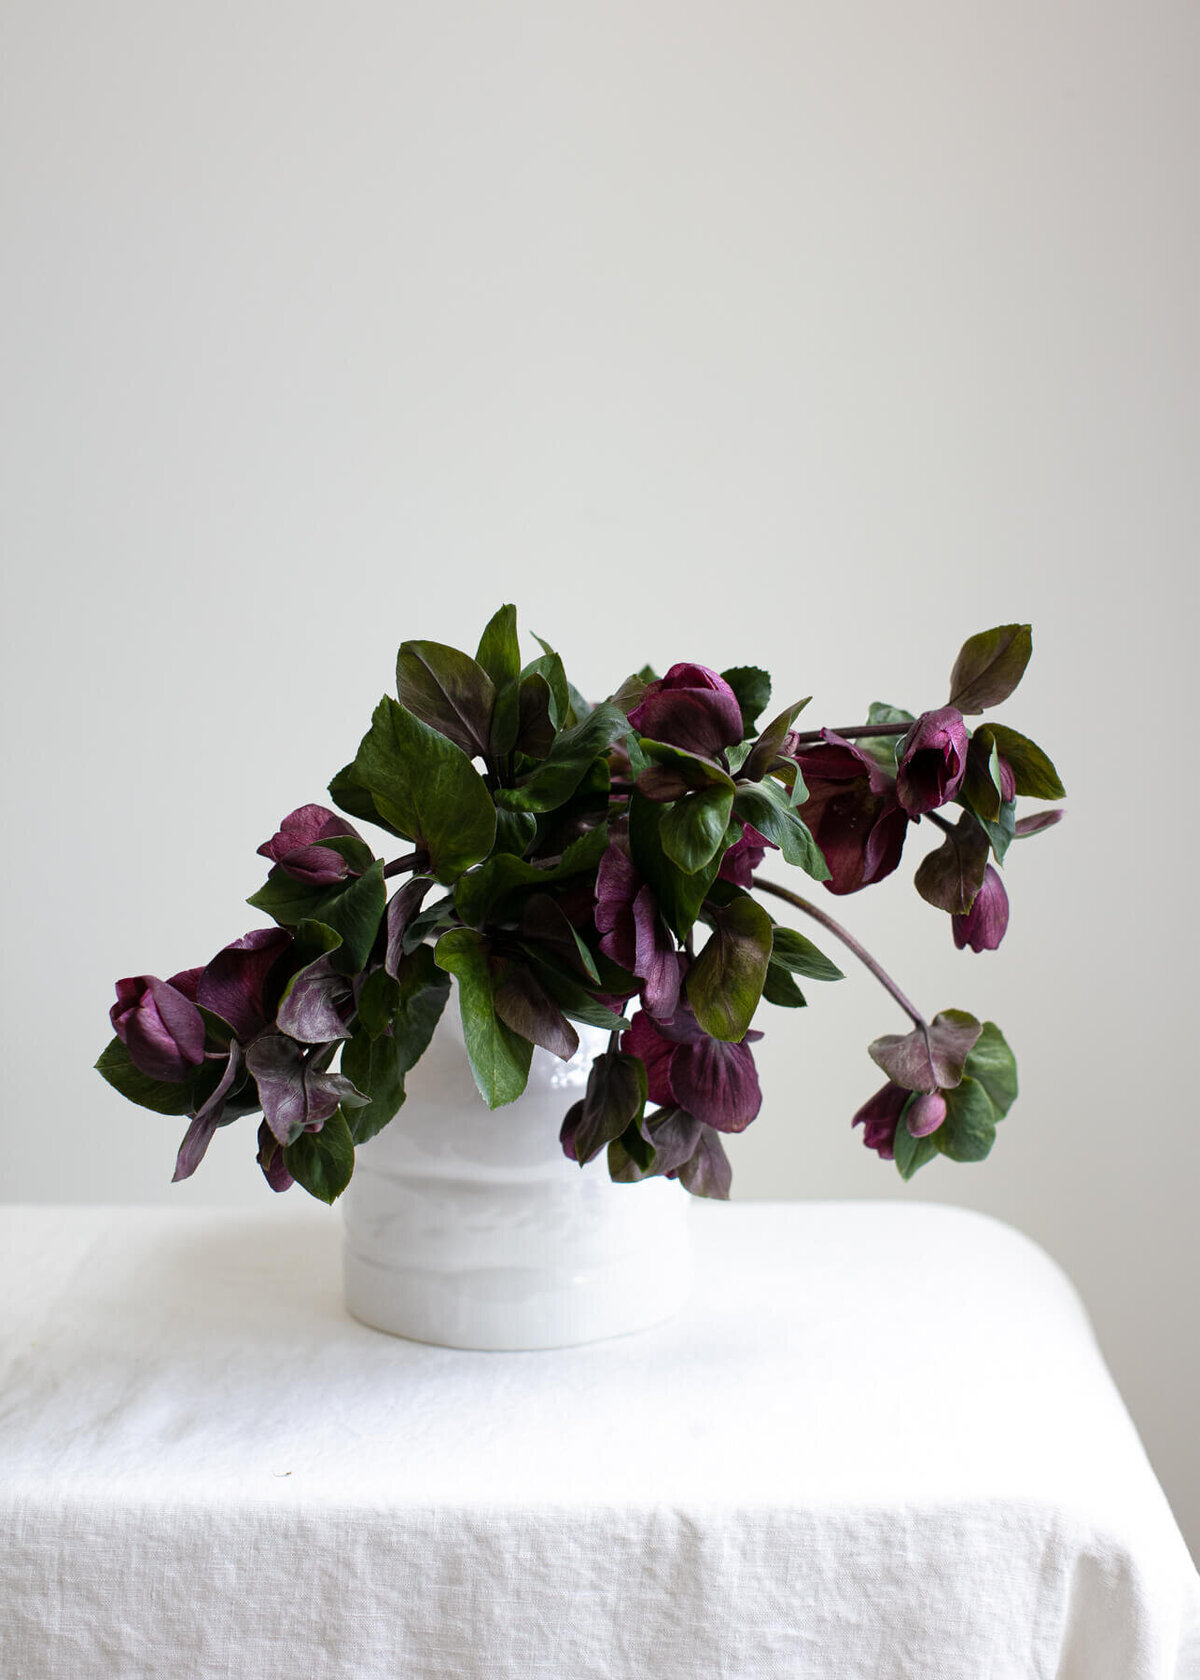 deep violet flowers and dark green foliage drooping over white vintage vase on white linen tablecloth